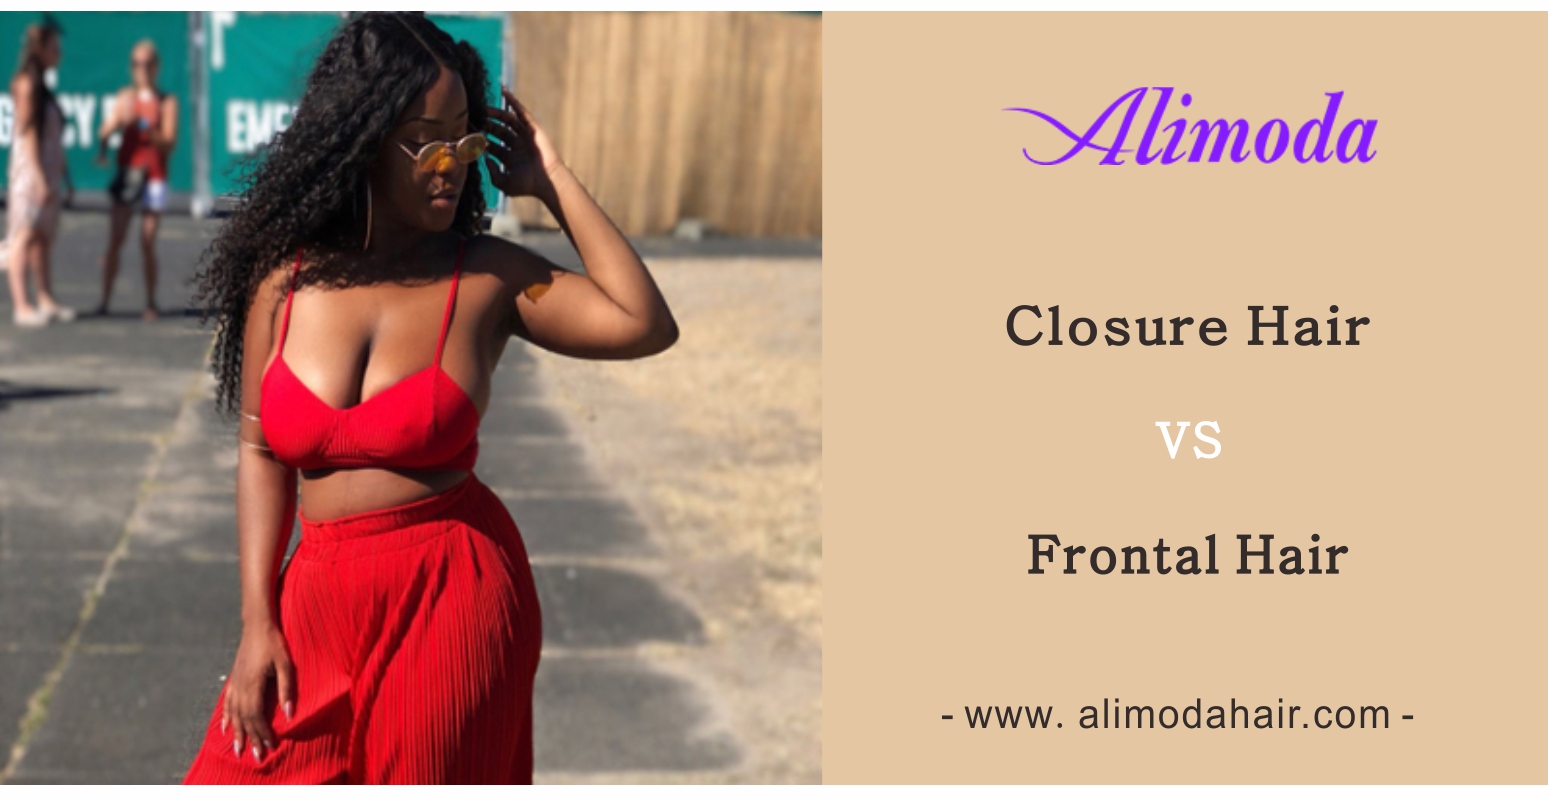 Differences and similarities between closure and frontal